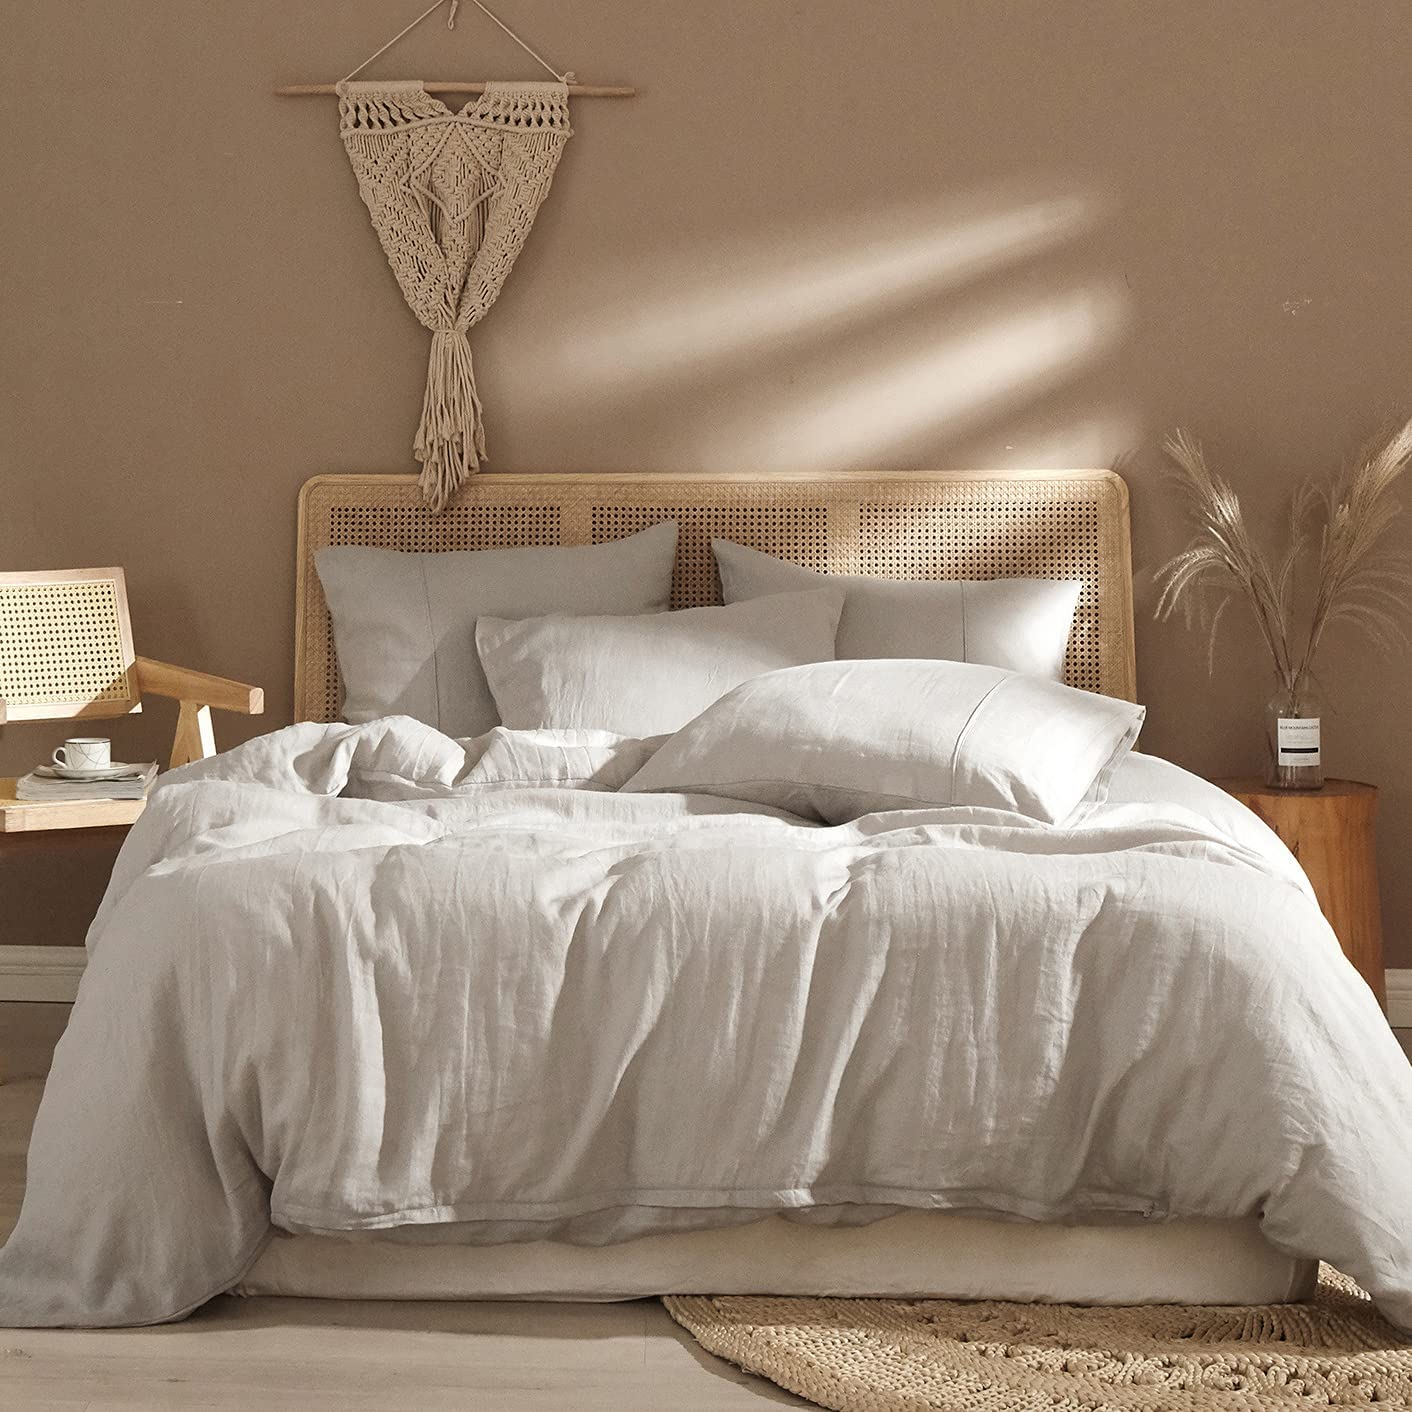 Price:$105.99  Pure Linen Duvet Cover 100% Washed French Natural Linen Queen Duvet Cover Sets, 3 Pieces ( 1 Linen Duvet Cover Queen with 2 Pillowcases) Soft Breathable Moisture Wicking Flax Duvet Cover Queen : Home & Kitchen